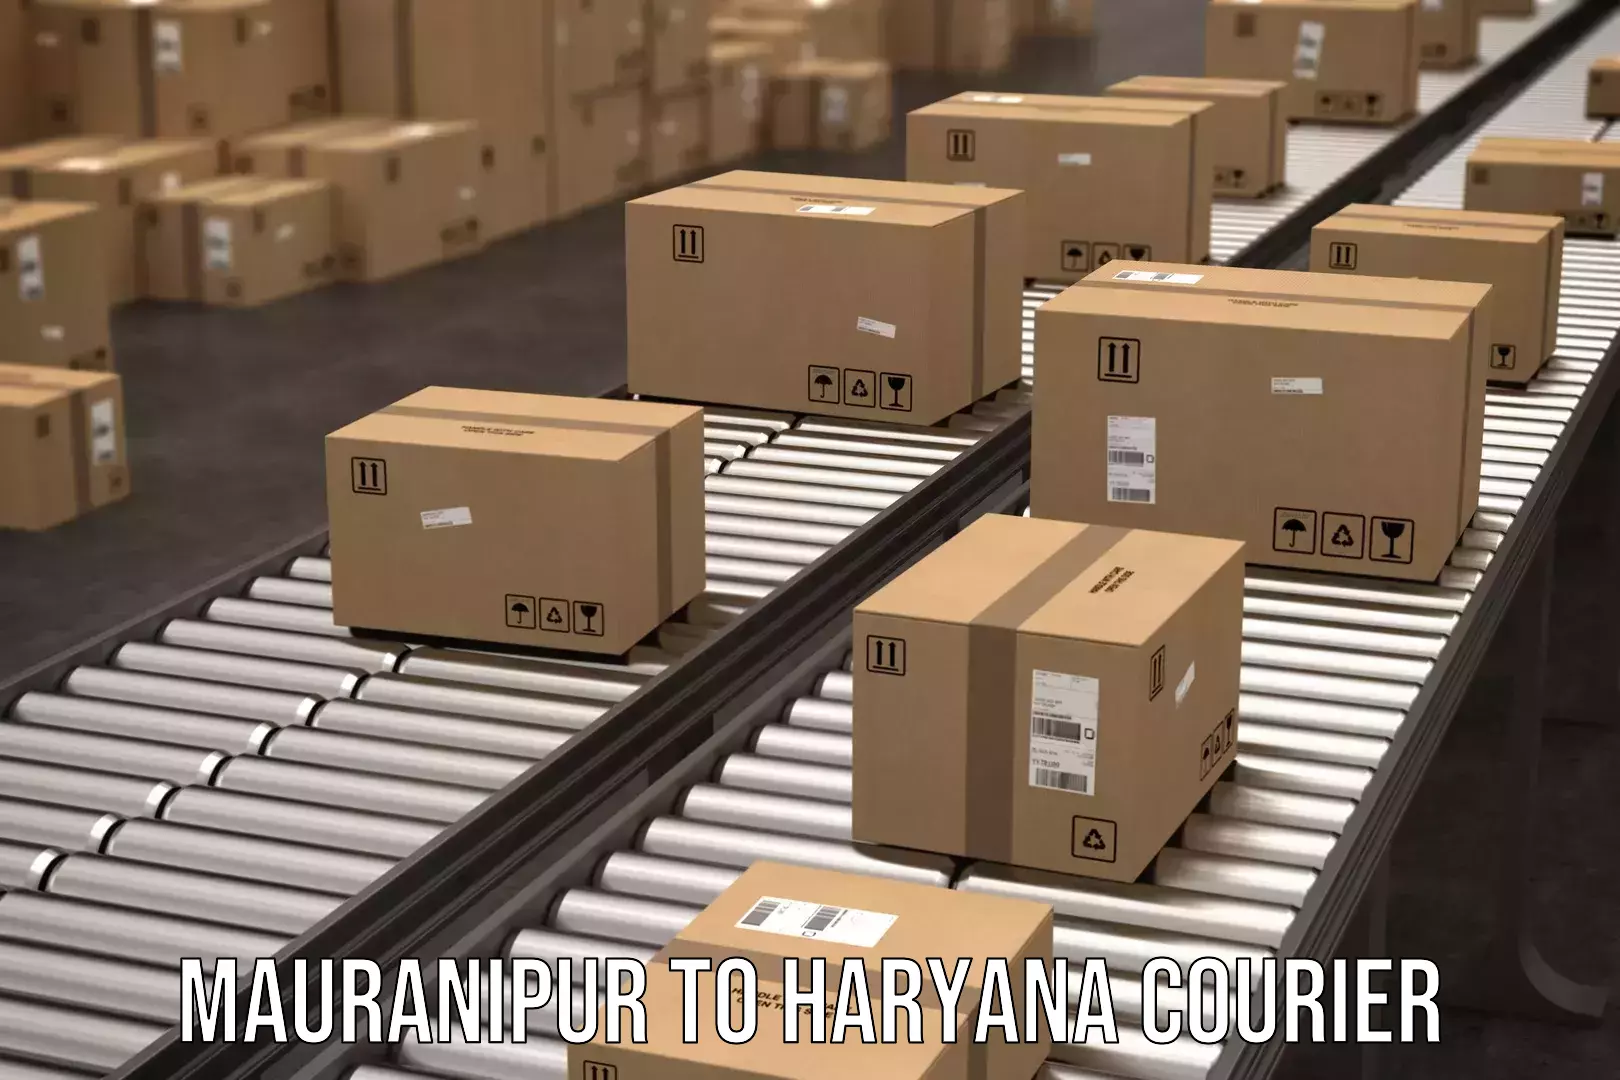 Efficient freight service Mauranipur to Haryana